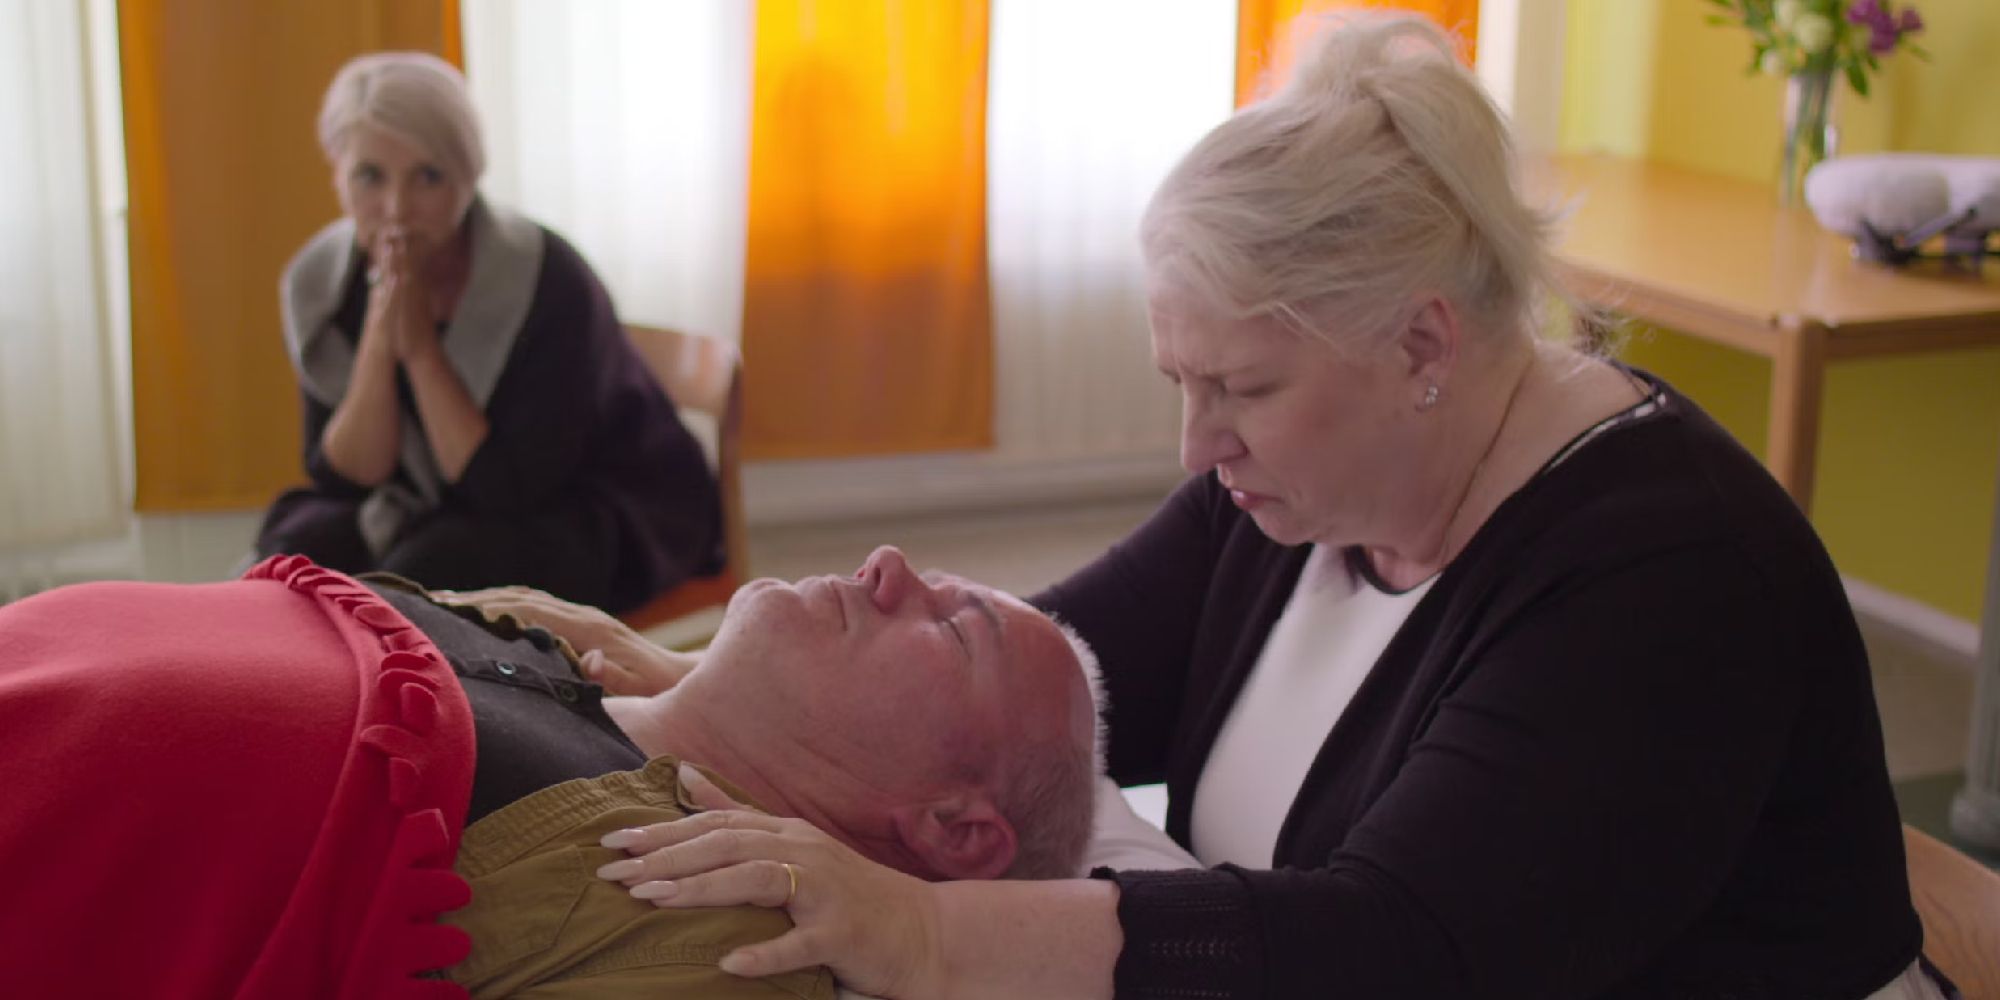 A man being spiritually treated by a woman in Surviving Death